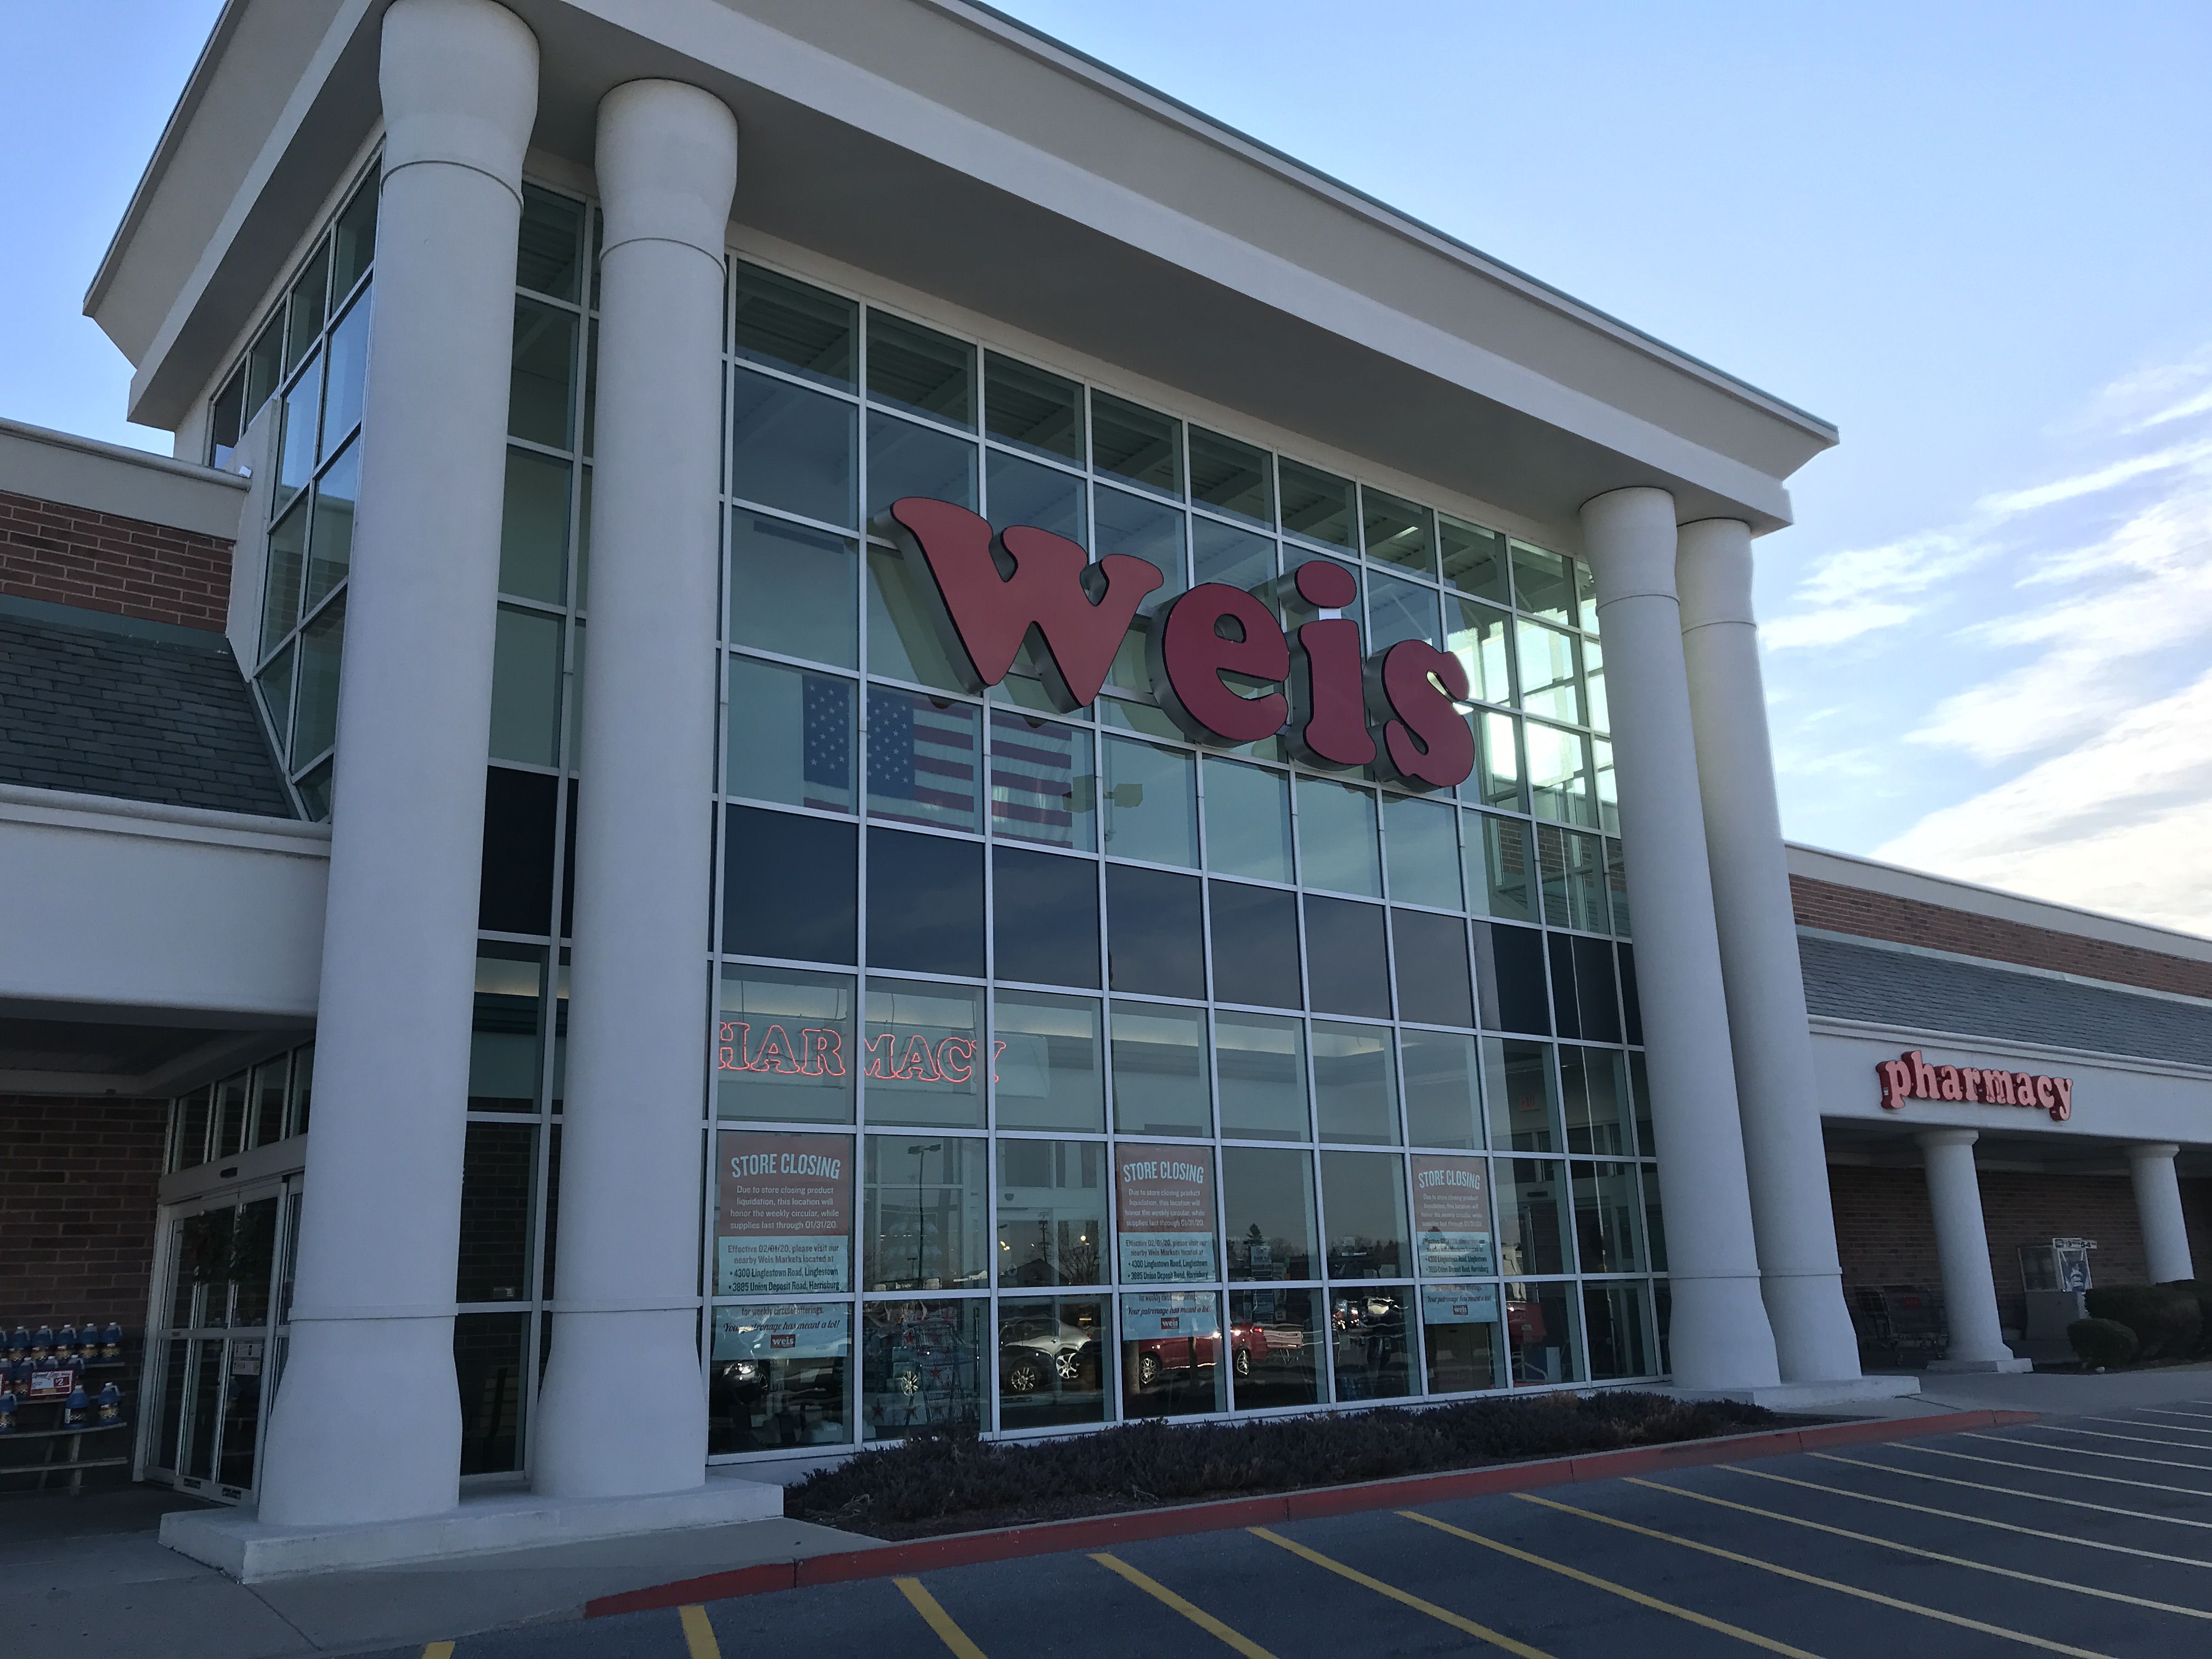 Weis closing Manchester Township location